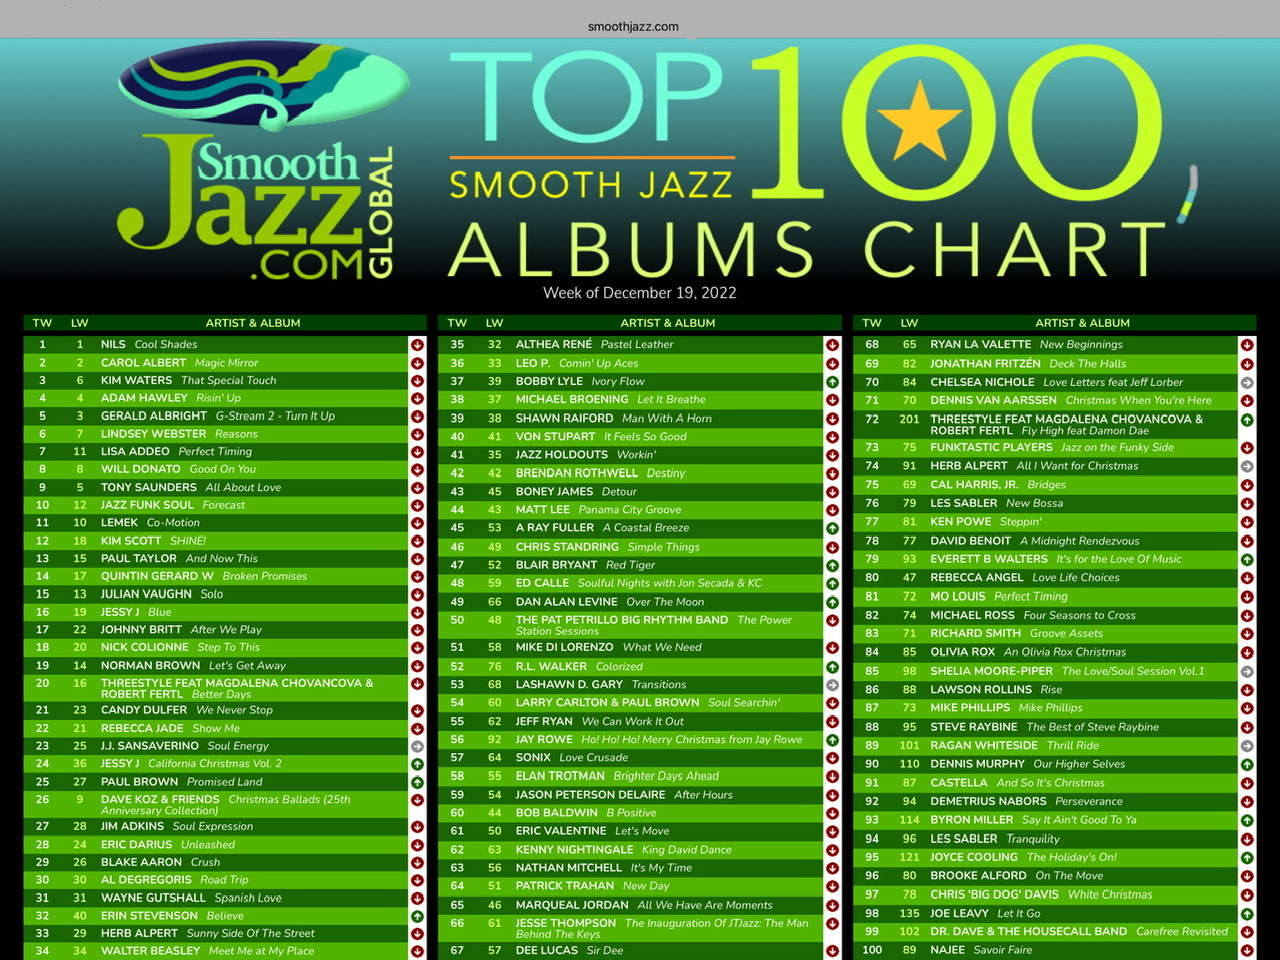 A smootjazz.com top one hundred albums chart in three columns on green background.